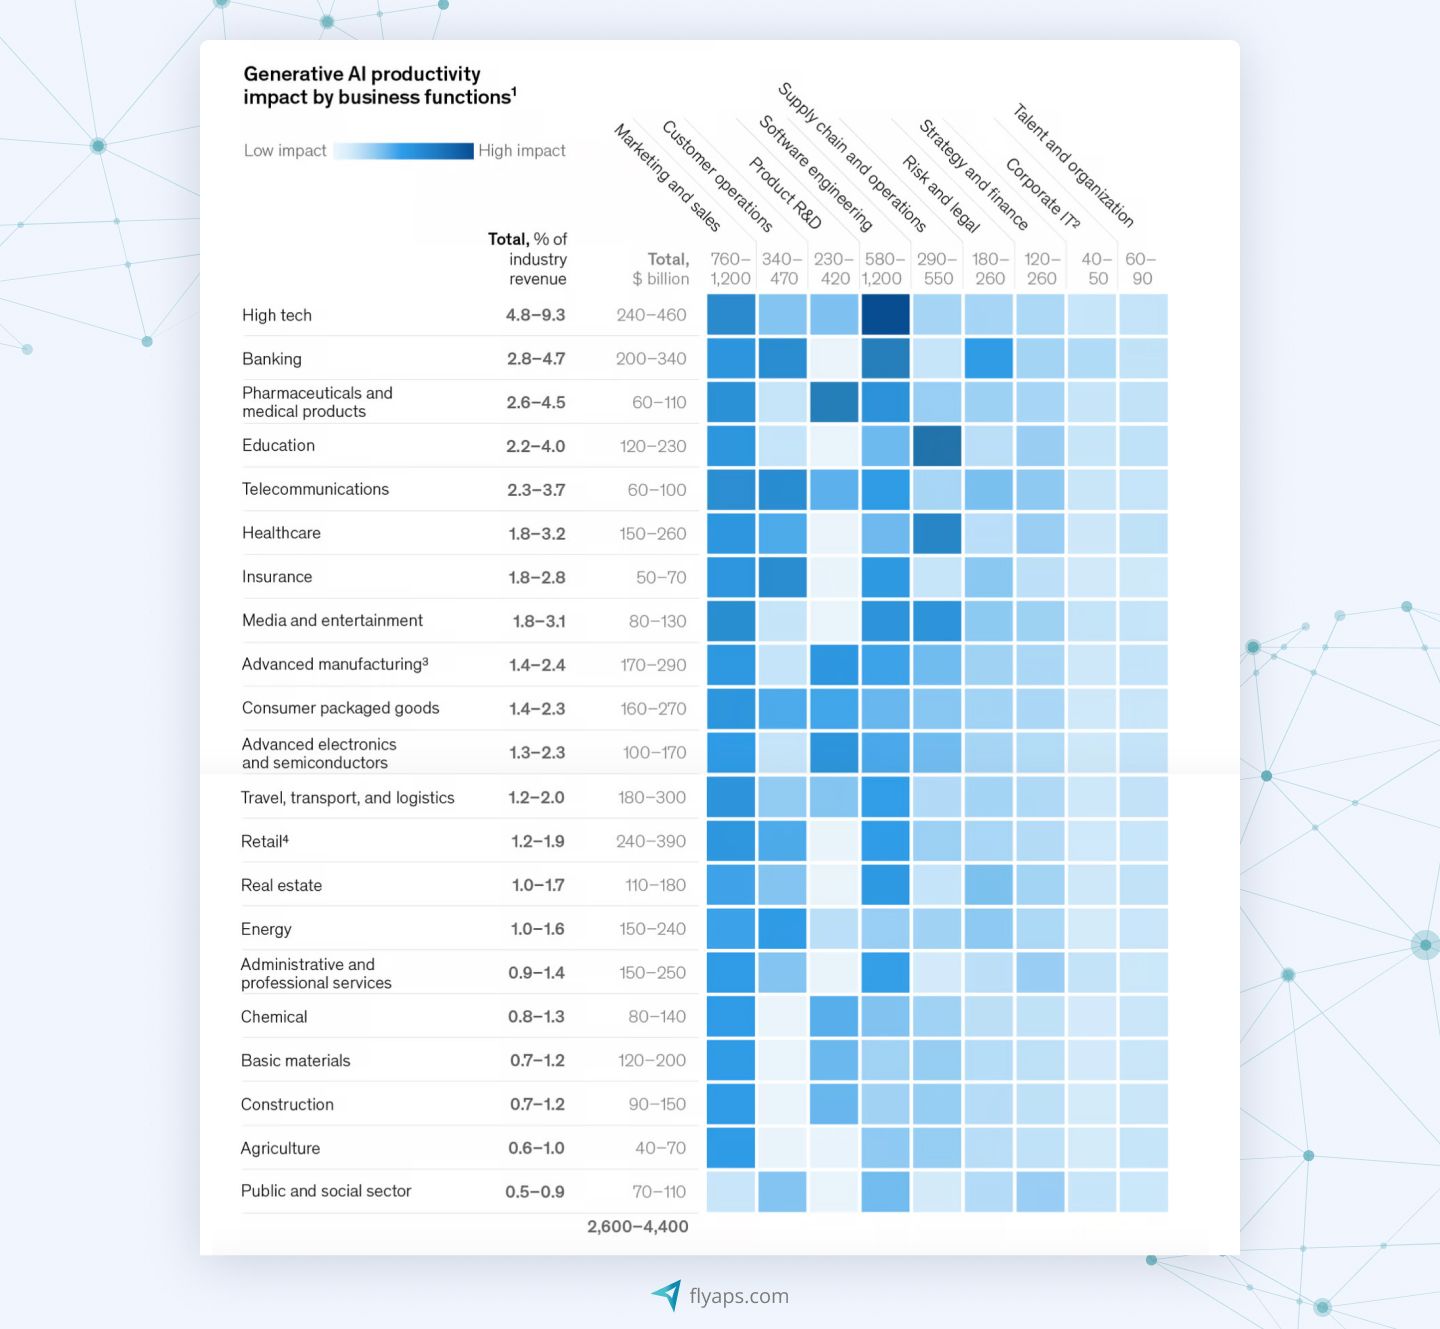 Generative AI productivity impact research provided by McKinsey